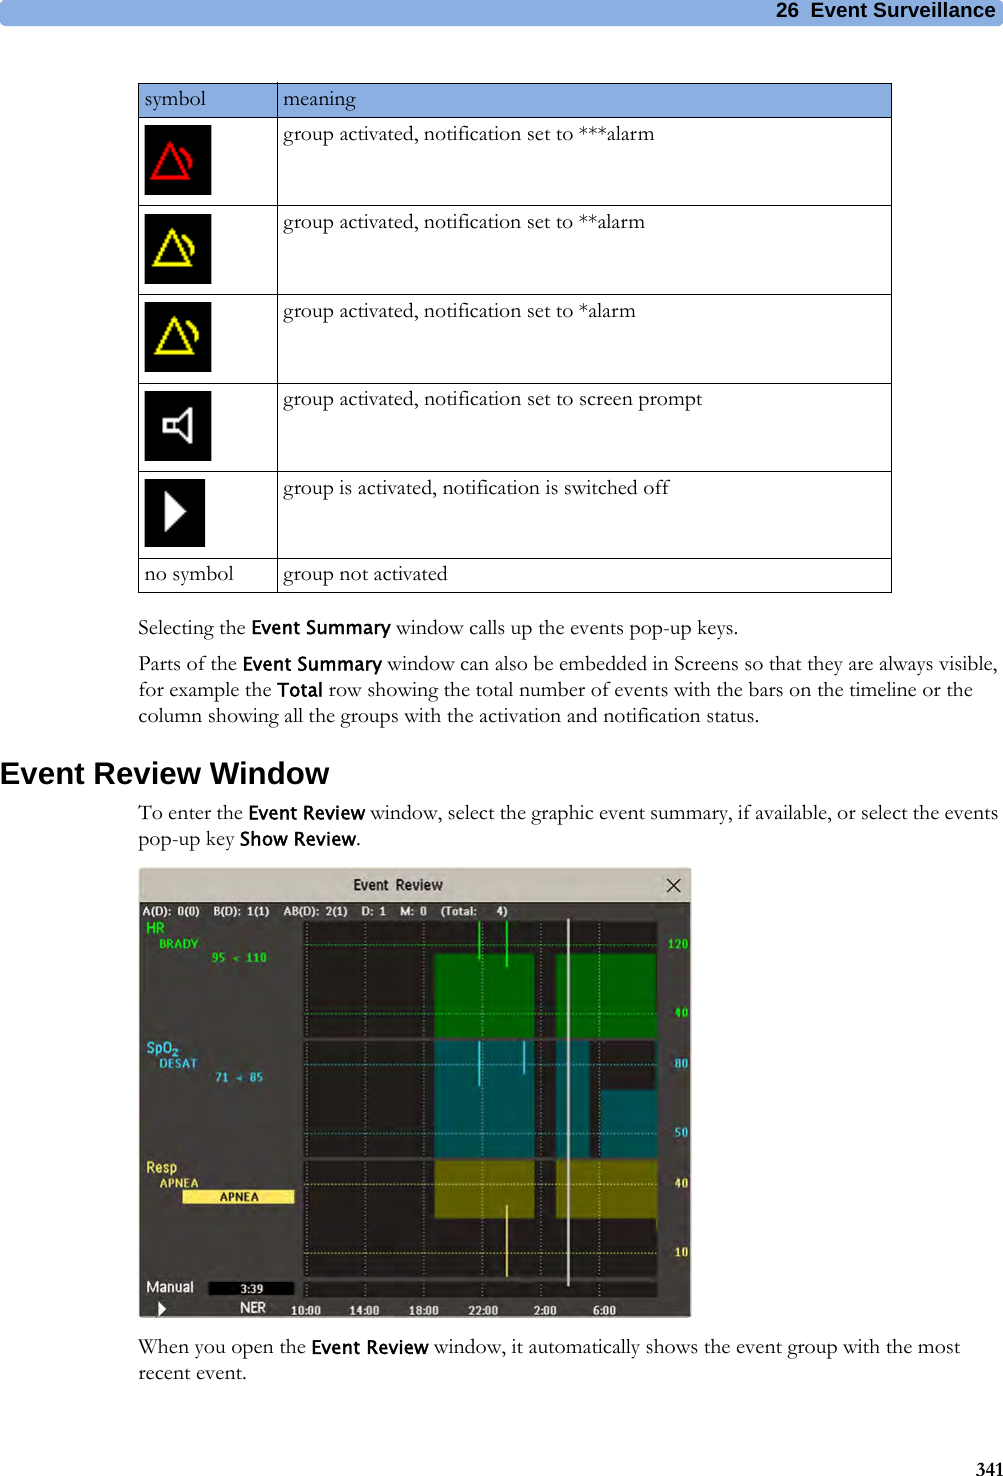 26 Event Surveillance341Selecting the Event Summary window calls up the events pop-up keys.Parts of the Event Summary window can also be embedded in Screens so that they are always visible, for example the Total row showing the total number of events with the bars on the timeline or the column showing all the groups with the activation and notification status.Event Review WindowTo enter the Event Review window, select the graphic event summary, if available, or select the events pop-up key Show Review.When you open the Event Review window, it automatically shows the event group with the most recent event.symbol meaninggroup activated, notification set to ***alarmgroup activated, notification set to **alarmgroup activated, notification set to *alarmgroup activated, notification set to screen promptgroup is activated, notification is switched offno symbol group not activated